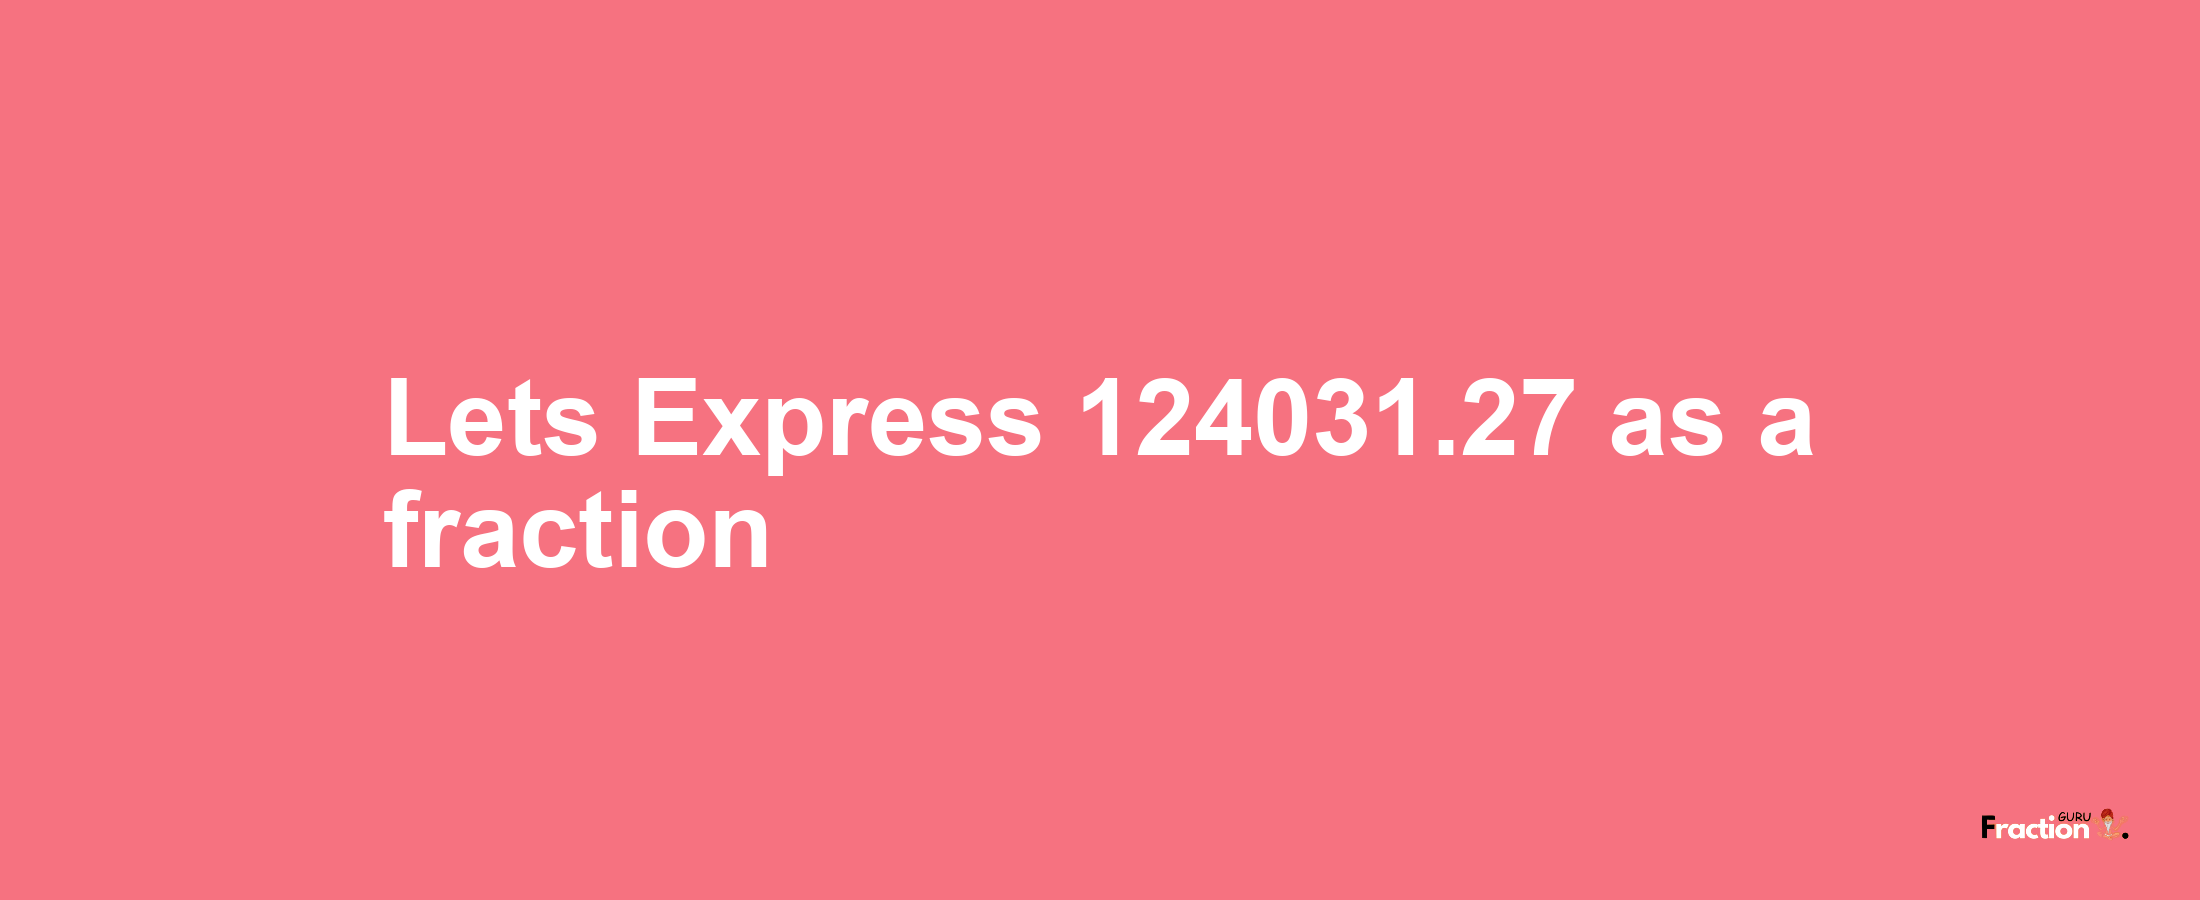 Lets Express 124031.27 as afraction